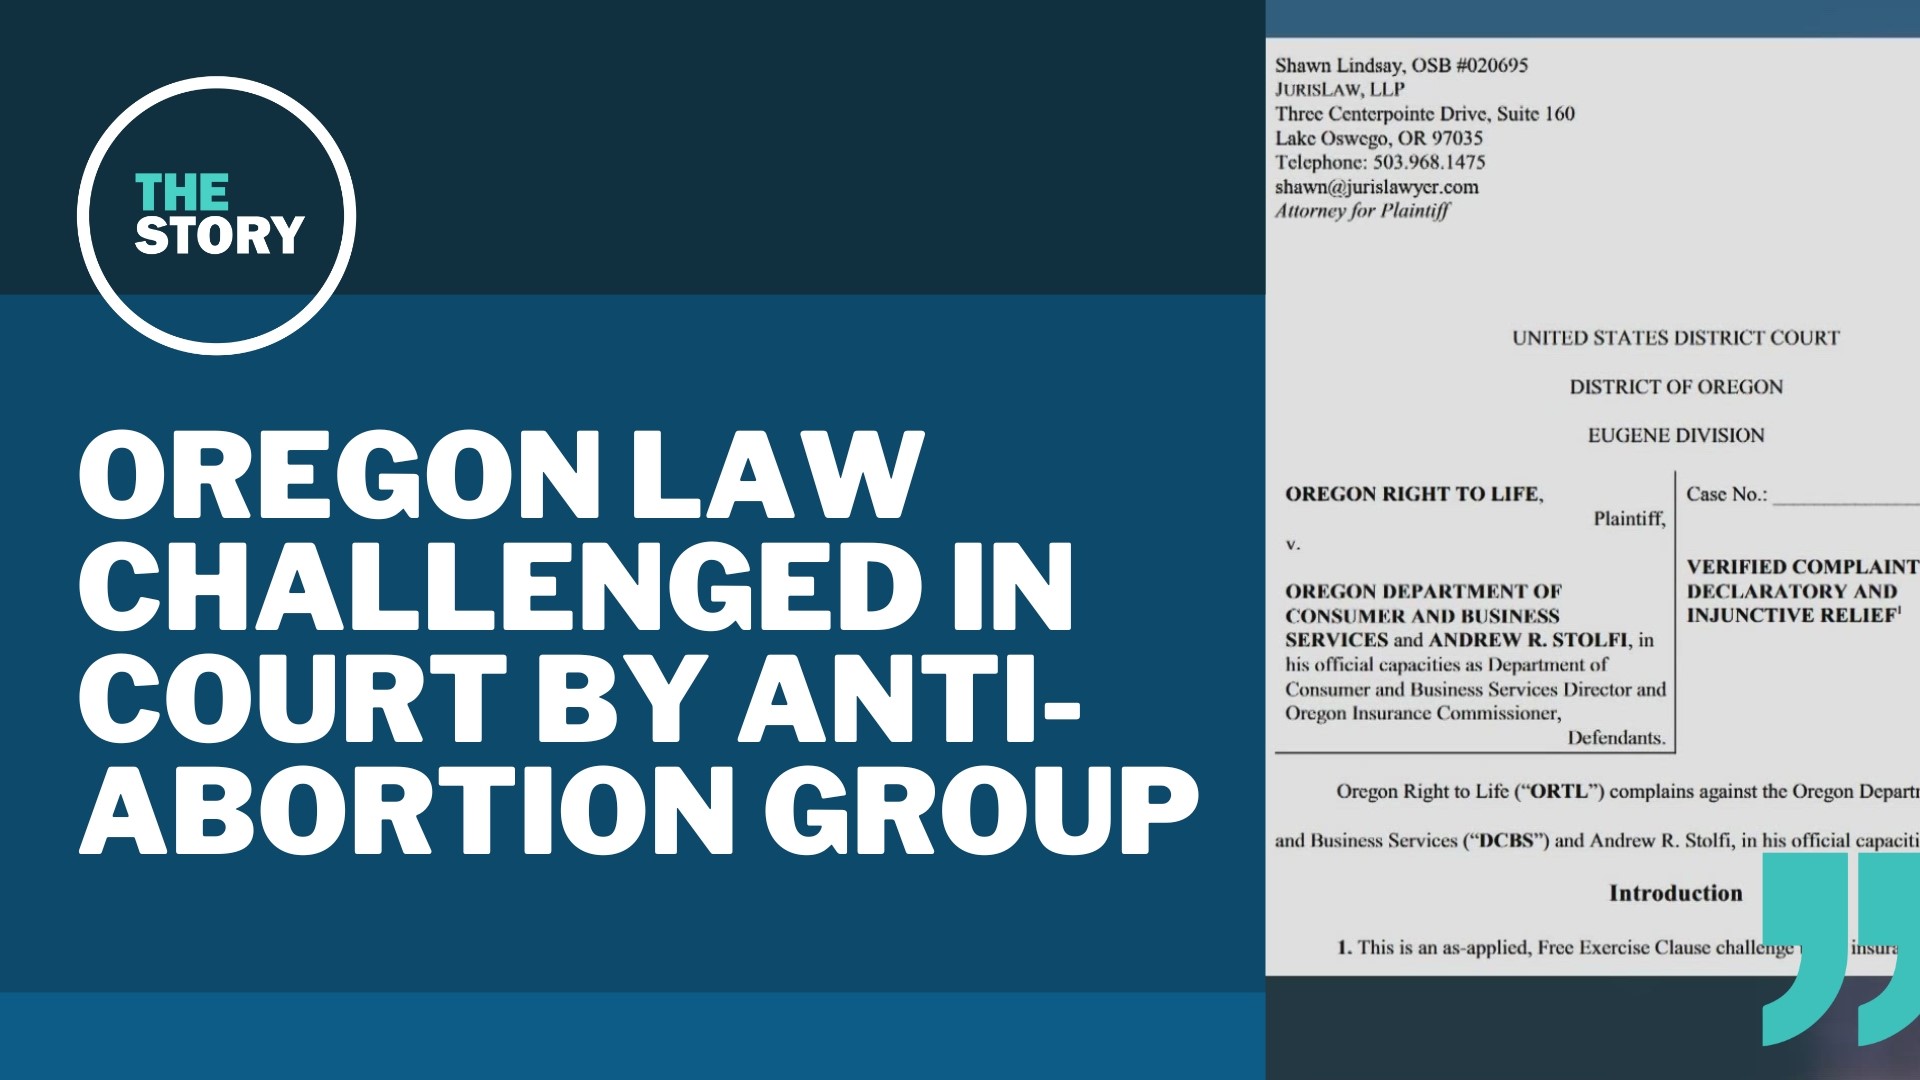 Under the 2017 Oregon law, employer-provided insurance must cover abortion. That includes groups like Oregon Right to Life that actively work against it.